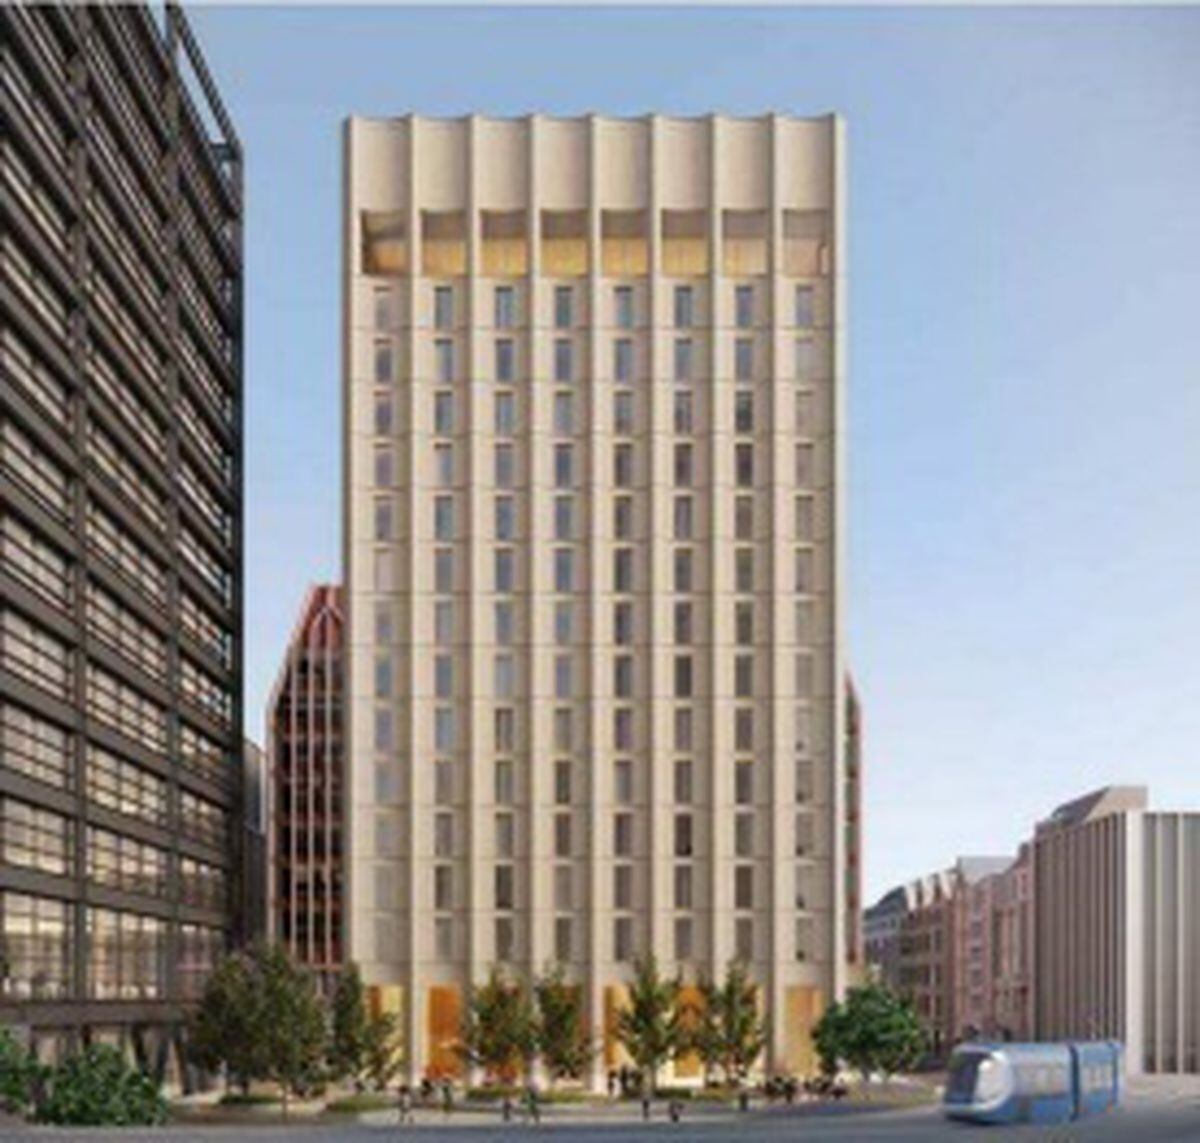 An artist's impression of how the hotel in Paradise Circus could look. Photo: Birmingham City Council 